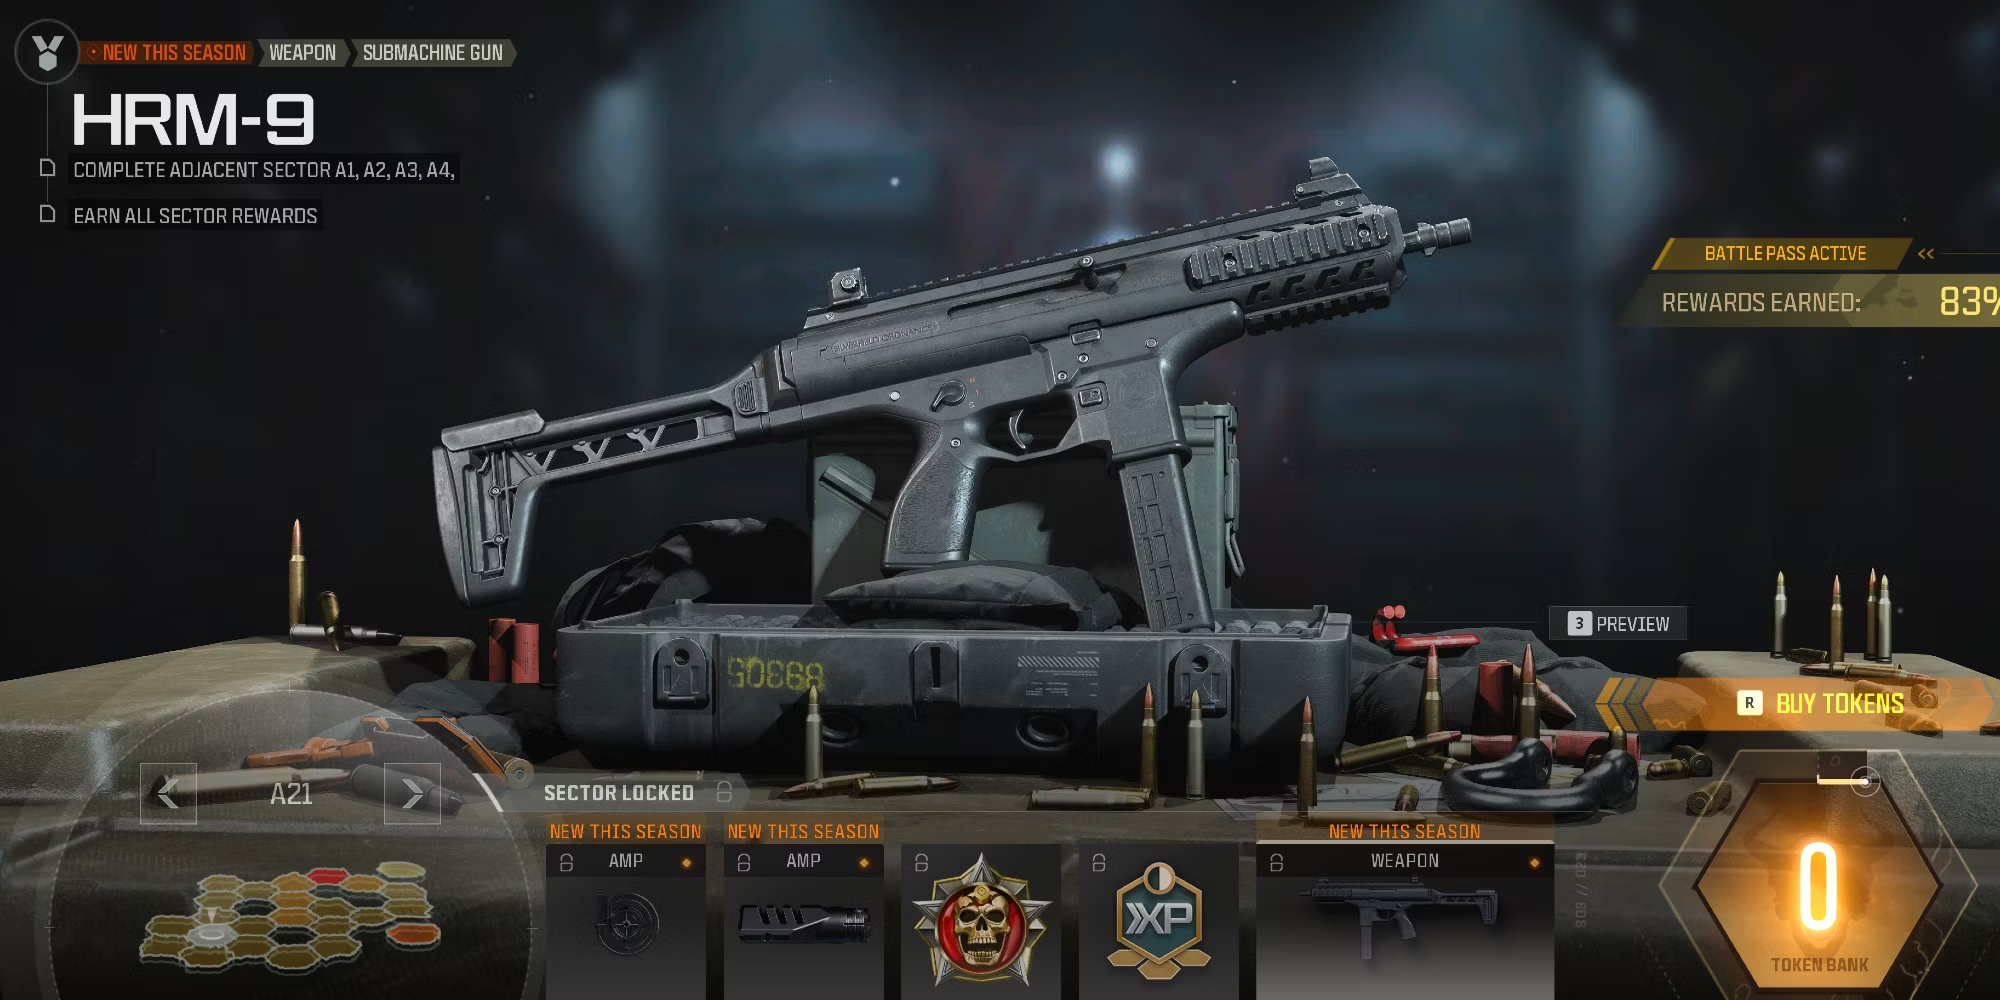 How to Unlock the HRM-9 SMG in MW3 & Warzone